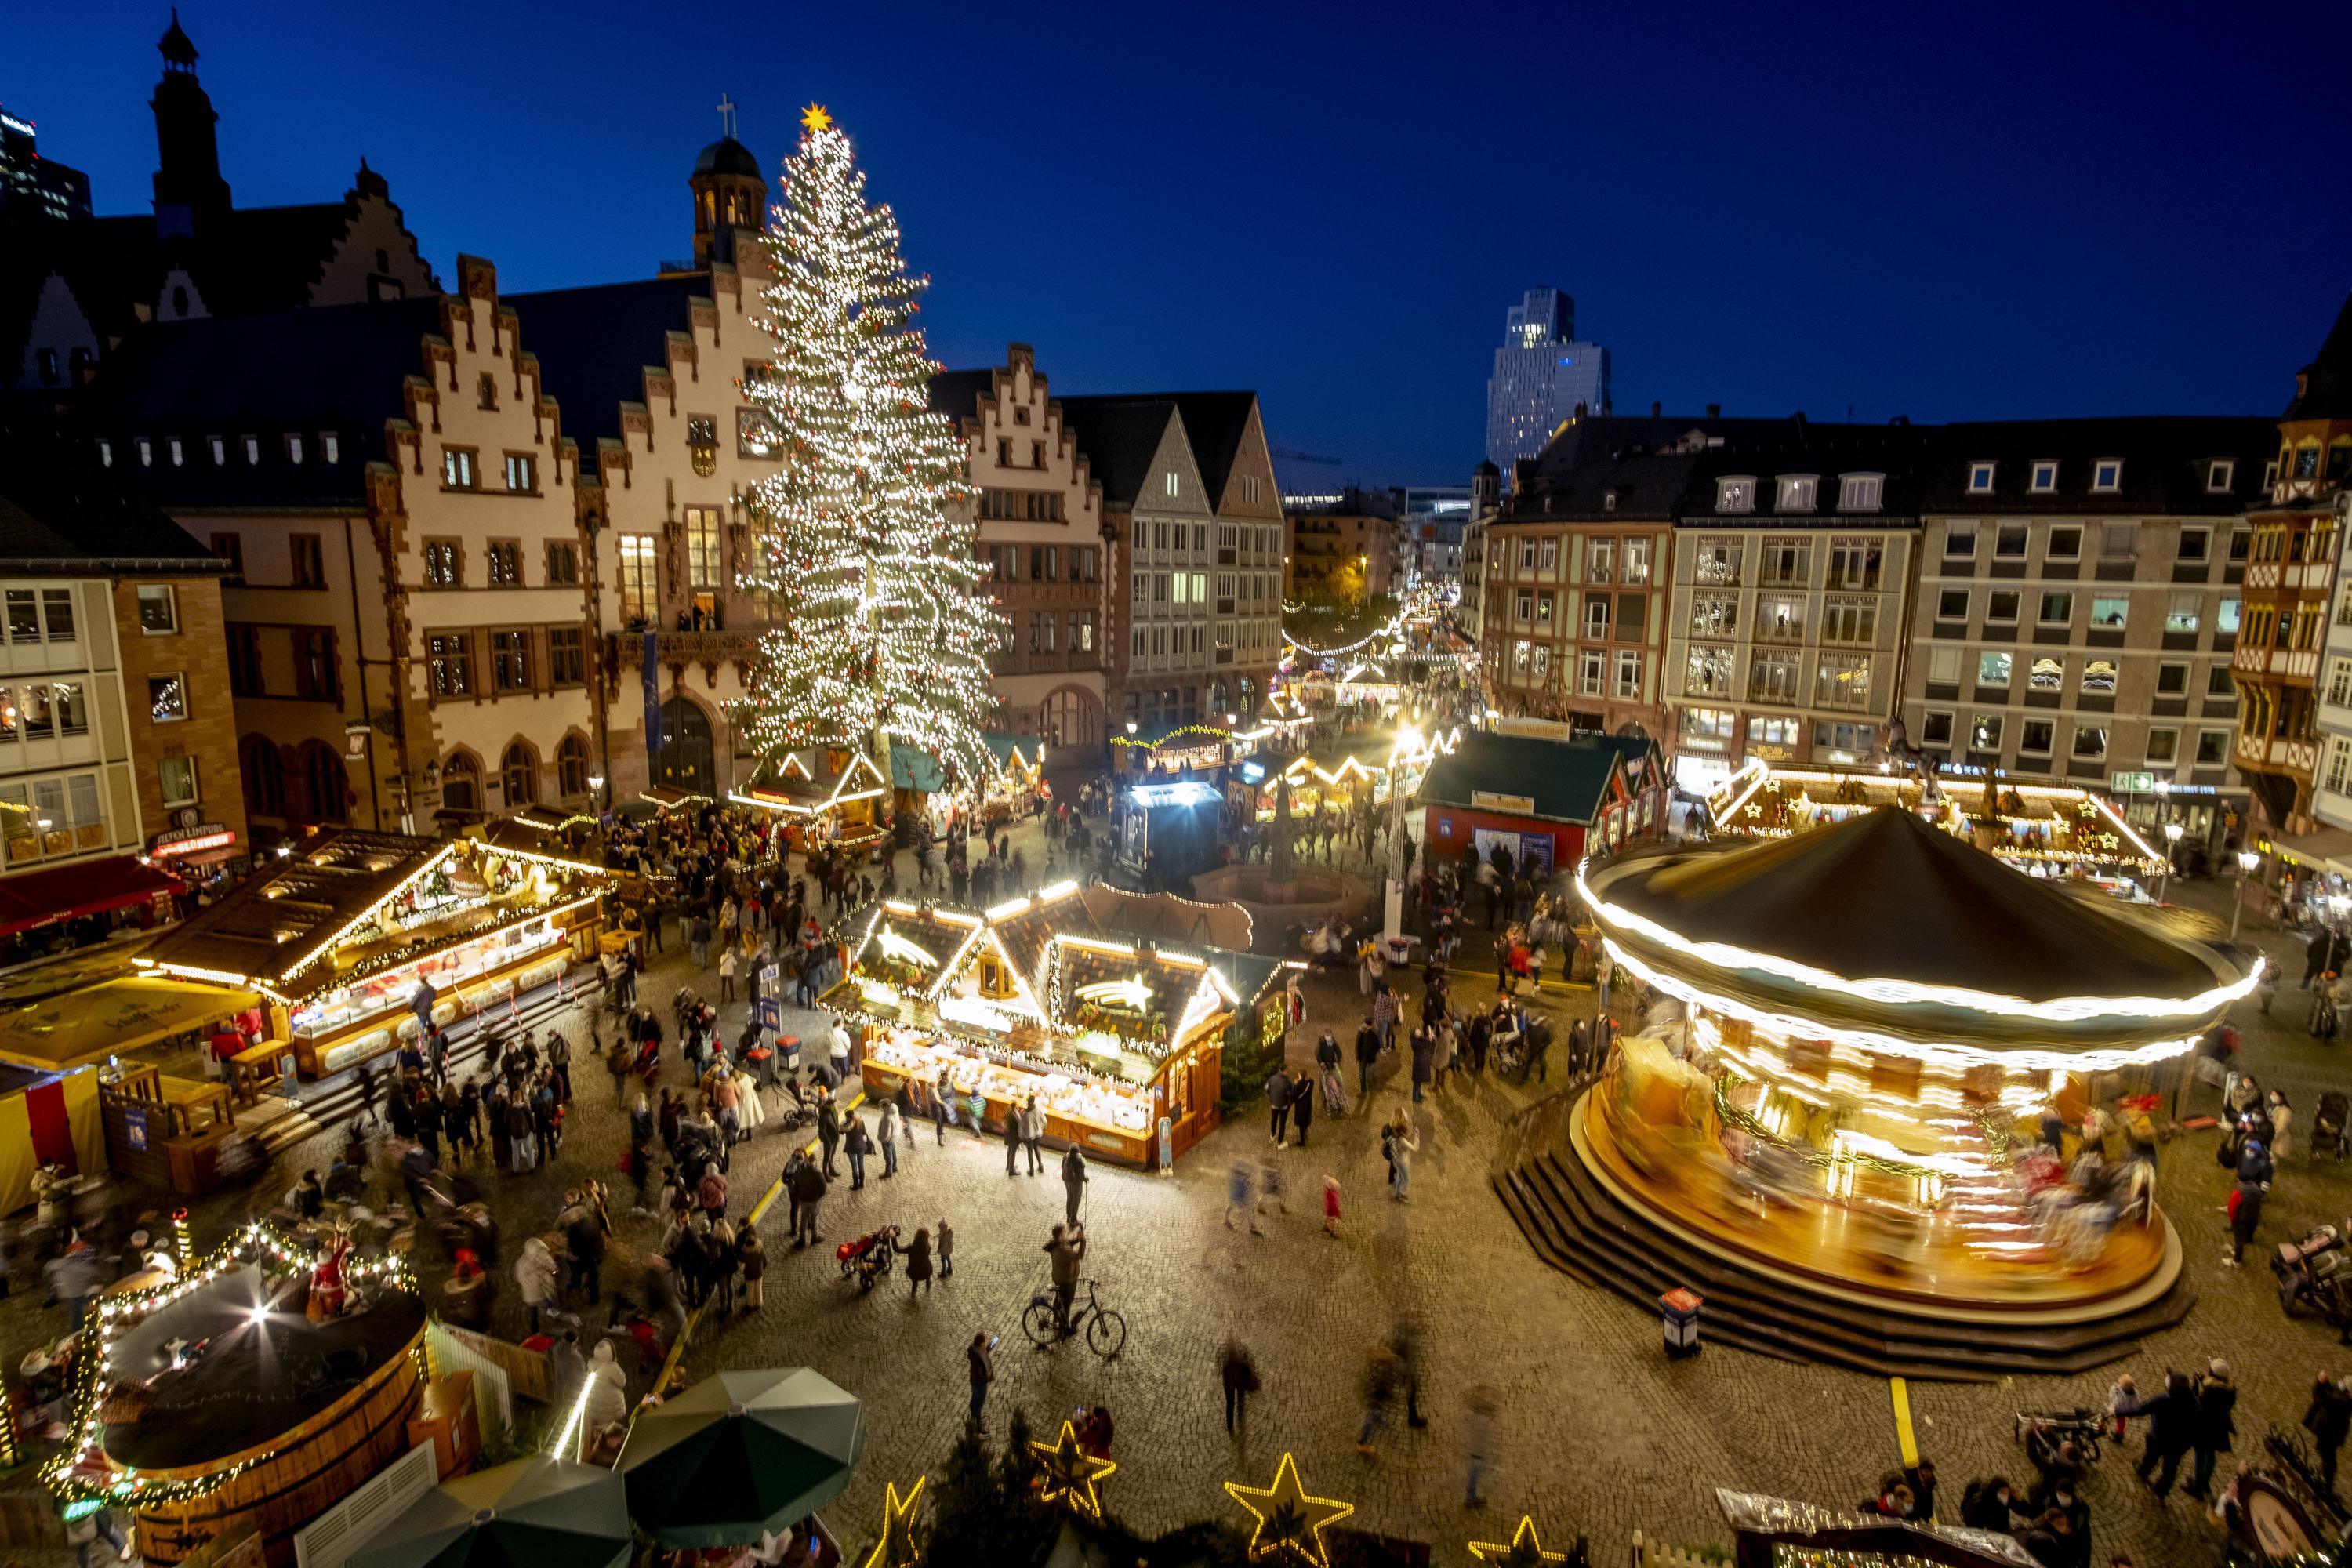 Europes Christmas markets warily open as COVID cases rise AP News 3000x2000